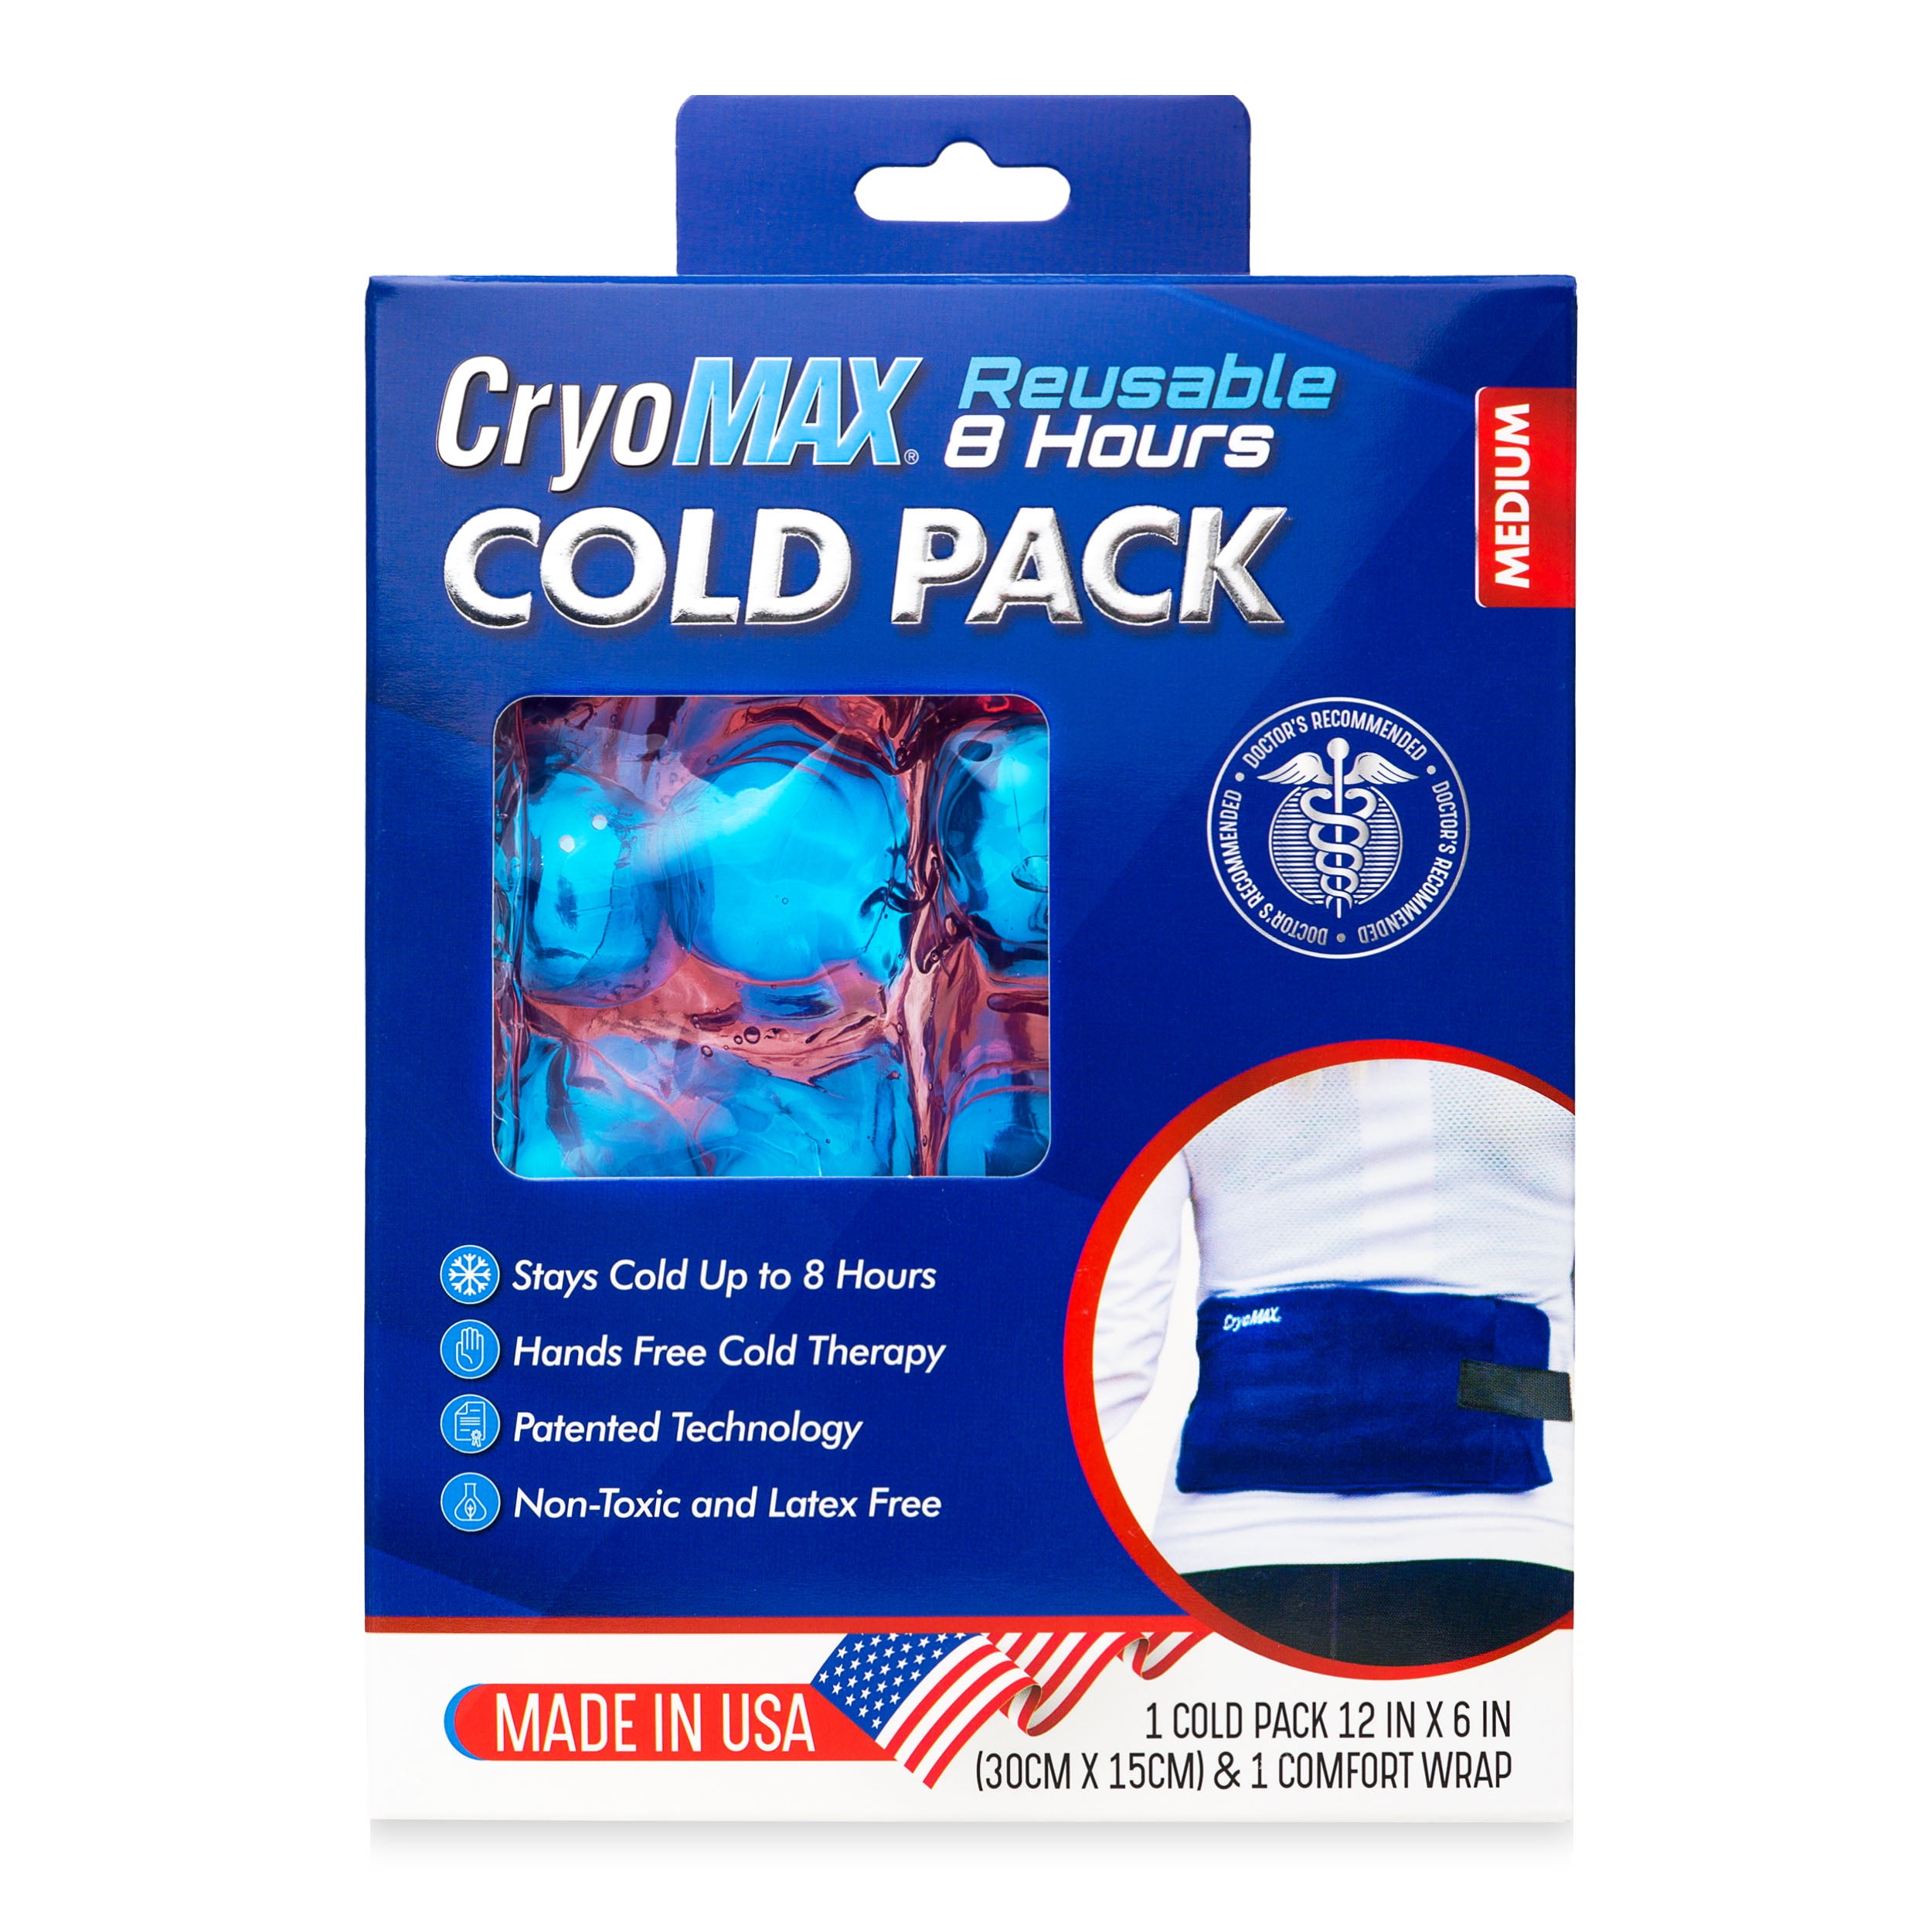 Cryo-Max Reusable 8 Hour Cold Pack